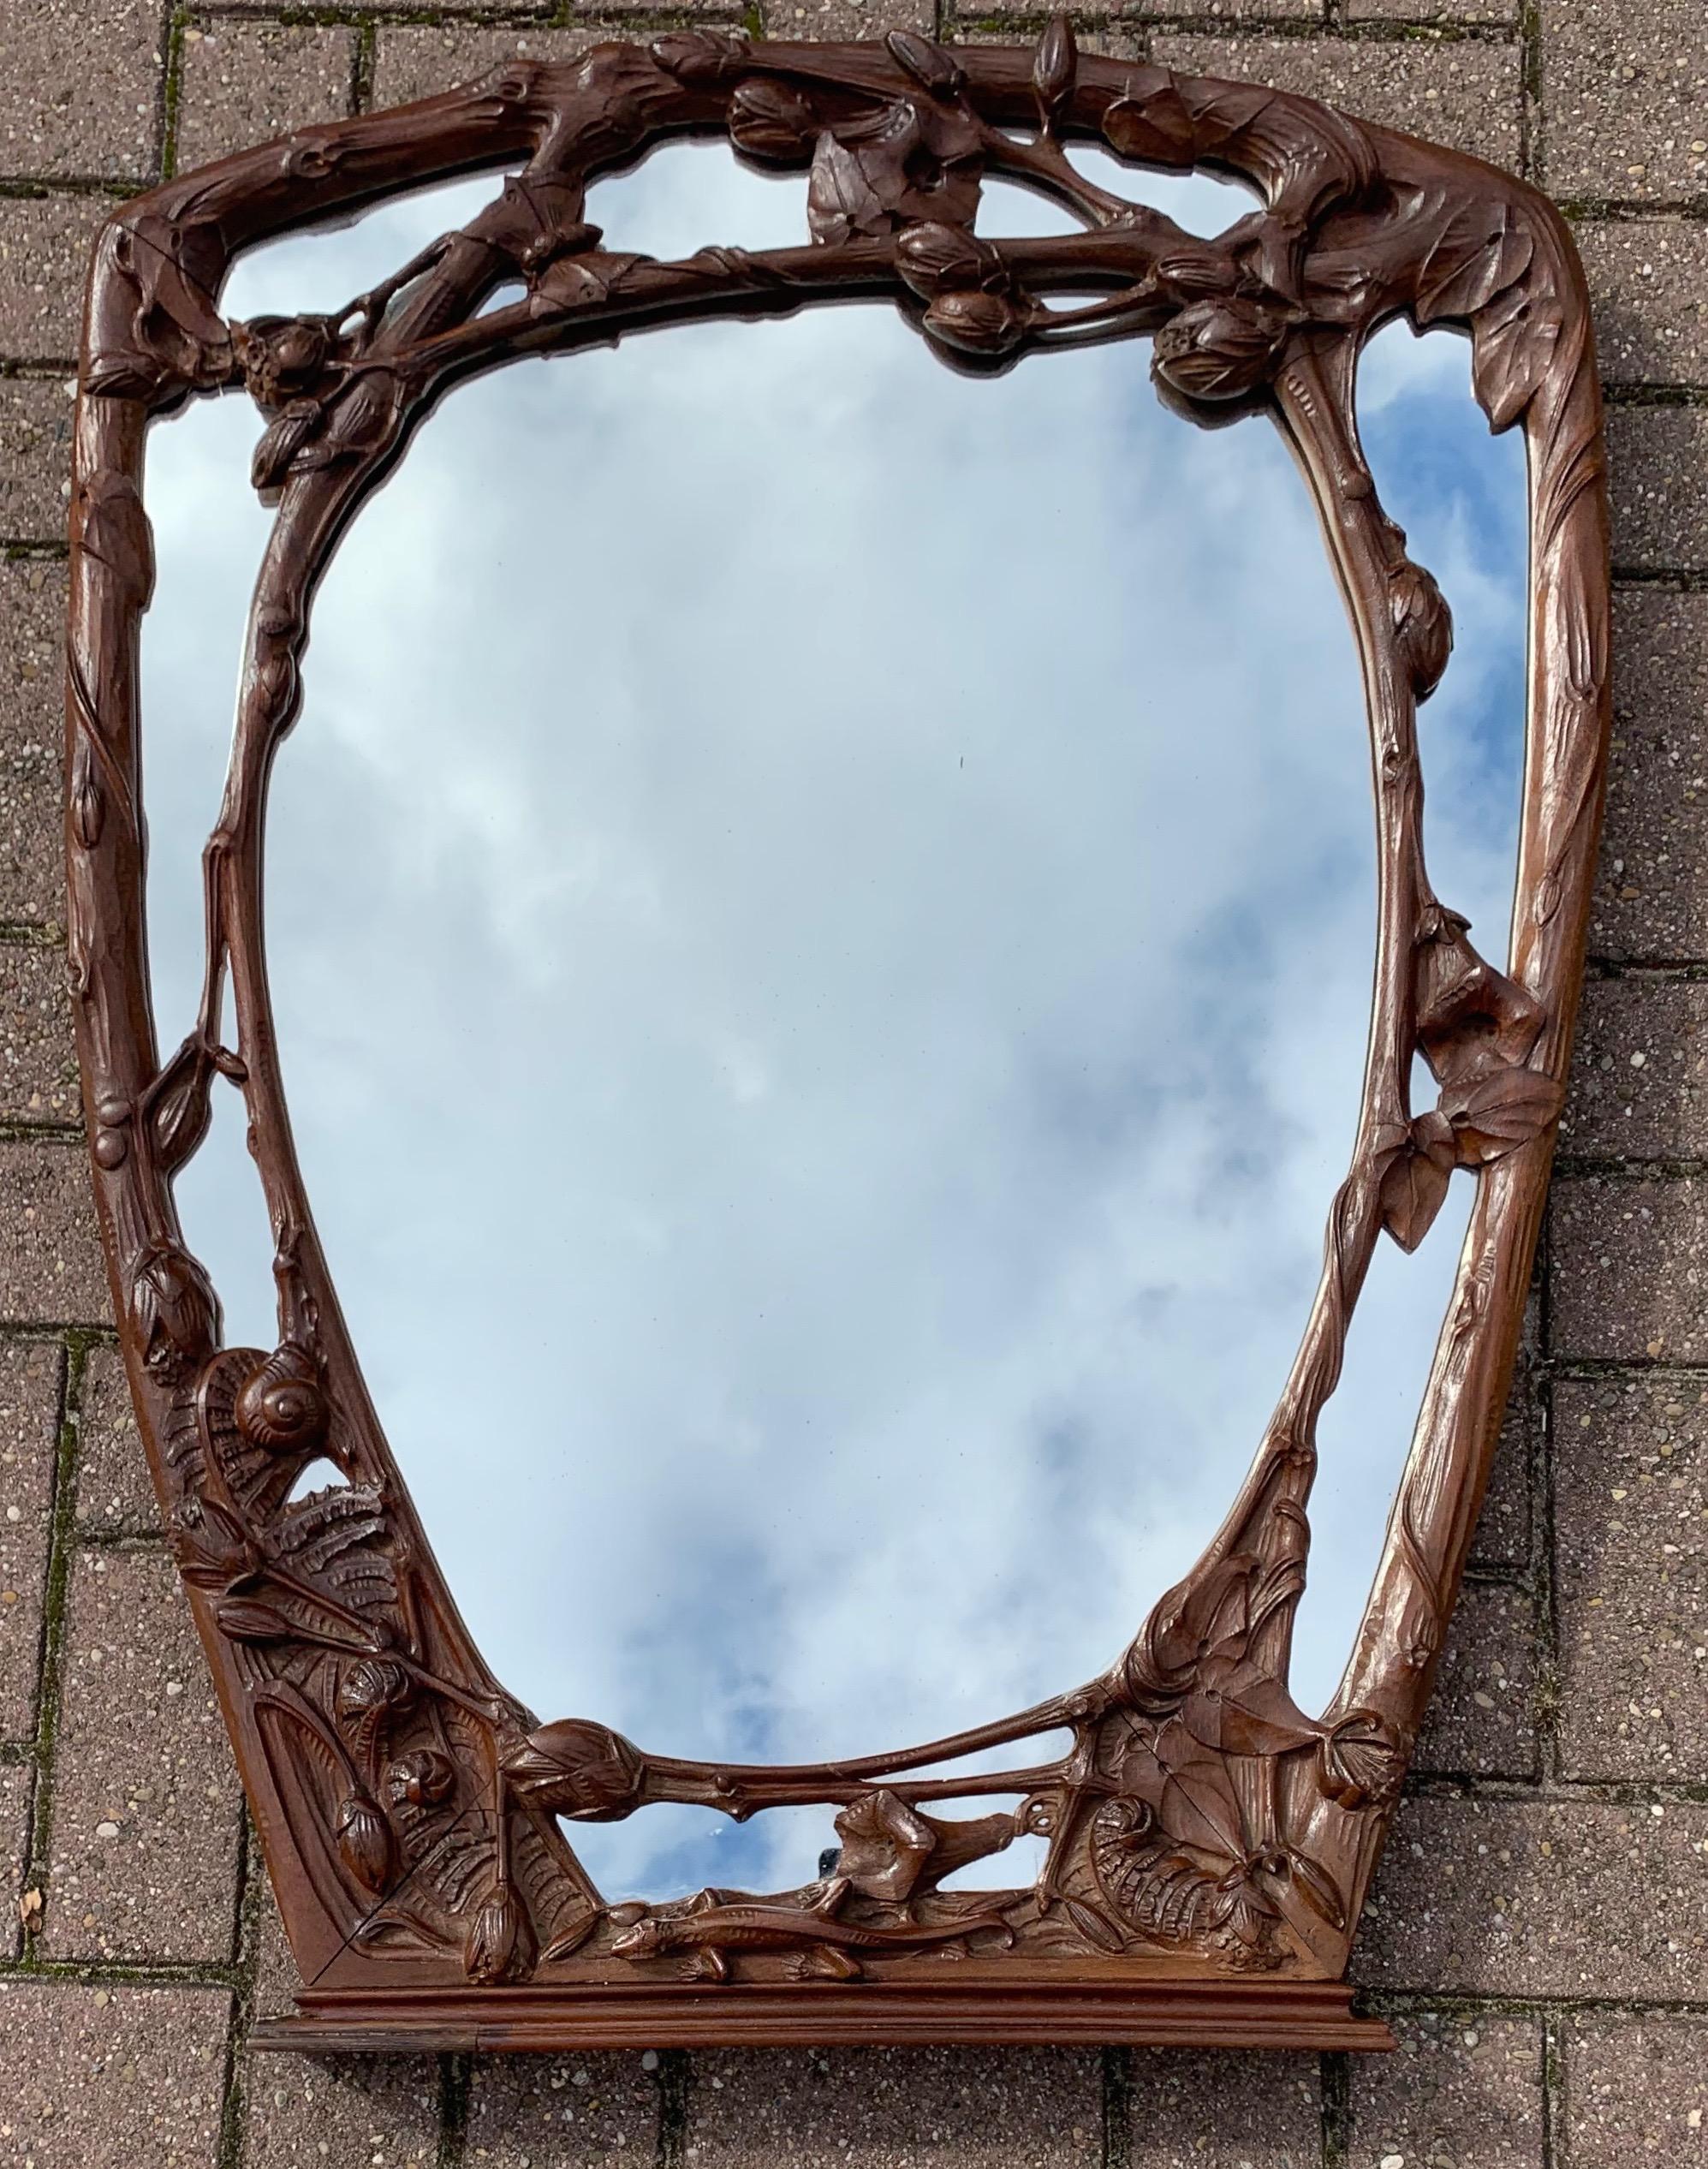 Perfect size and wonderfully artistic antique wall mirror.

If you are looking for unique Arts & Crafts antiques that make you want to stop and study them then this hand carved work of beauty could soon grace your living space. Designed and all